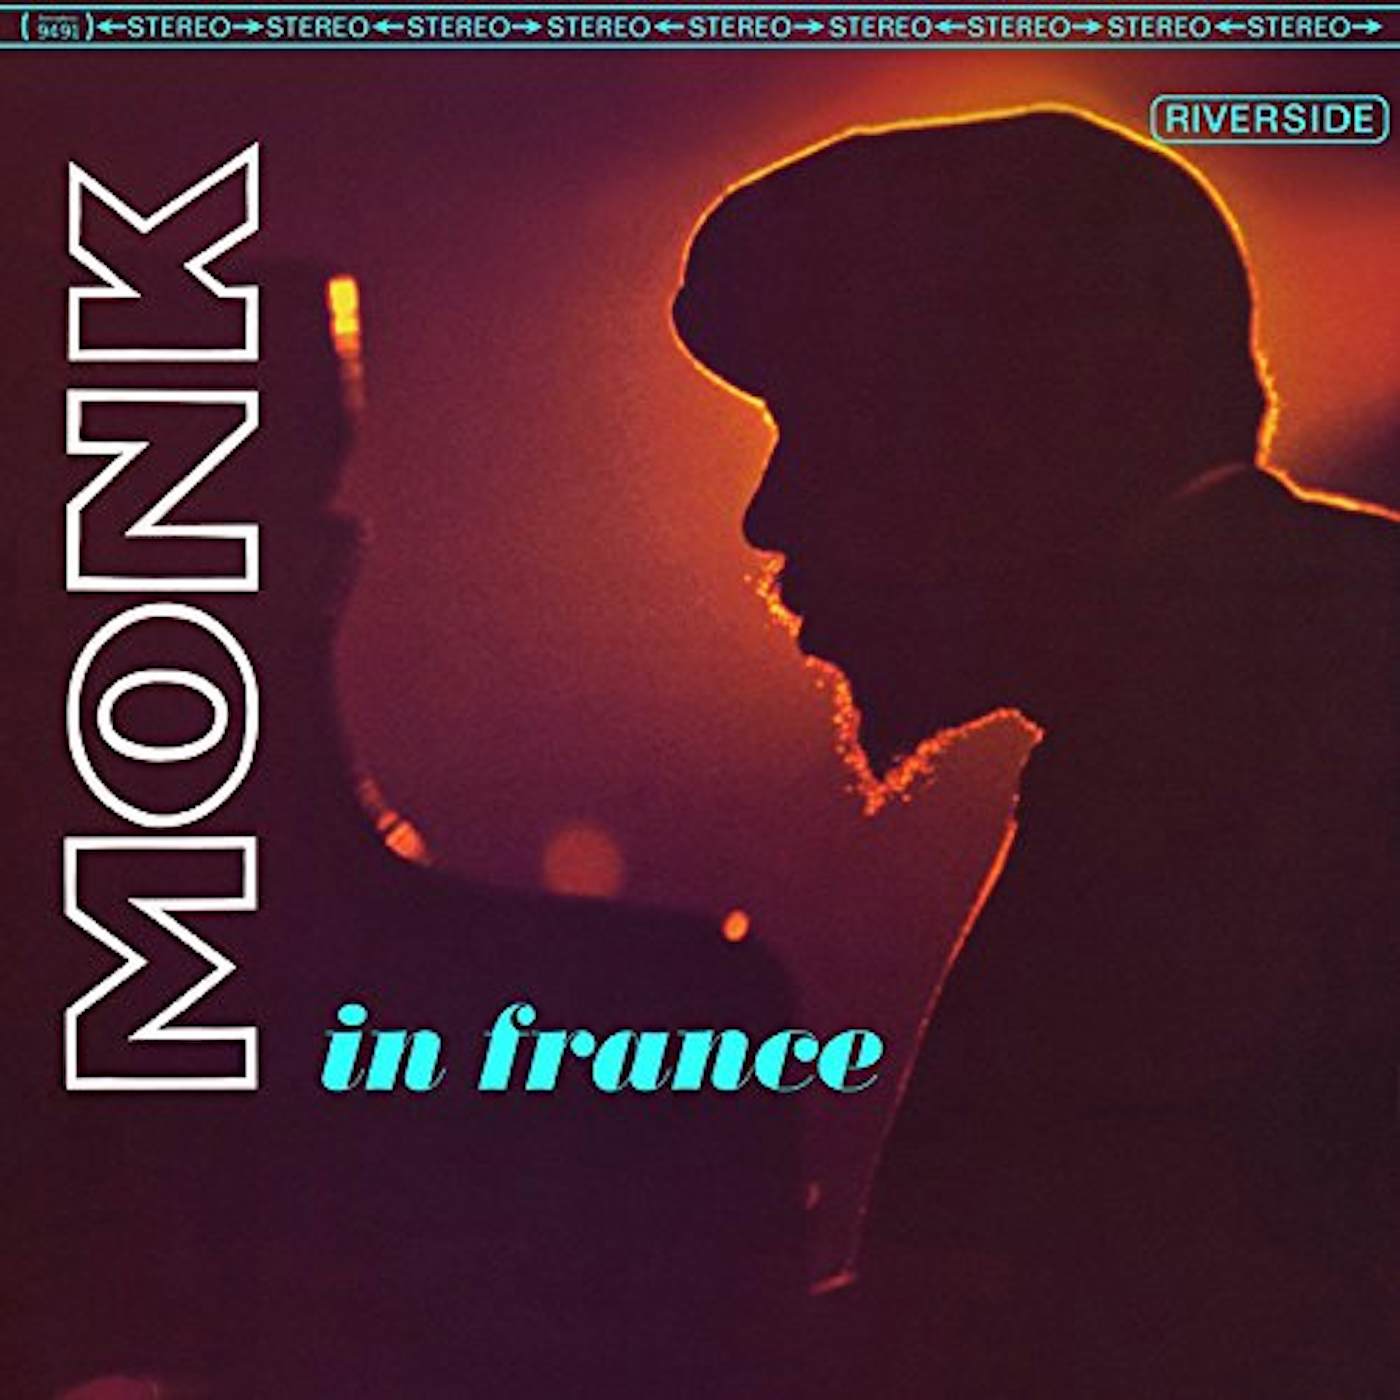 Thelonious Monk IN FRANCE Vinyl Record